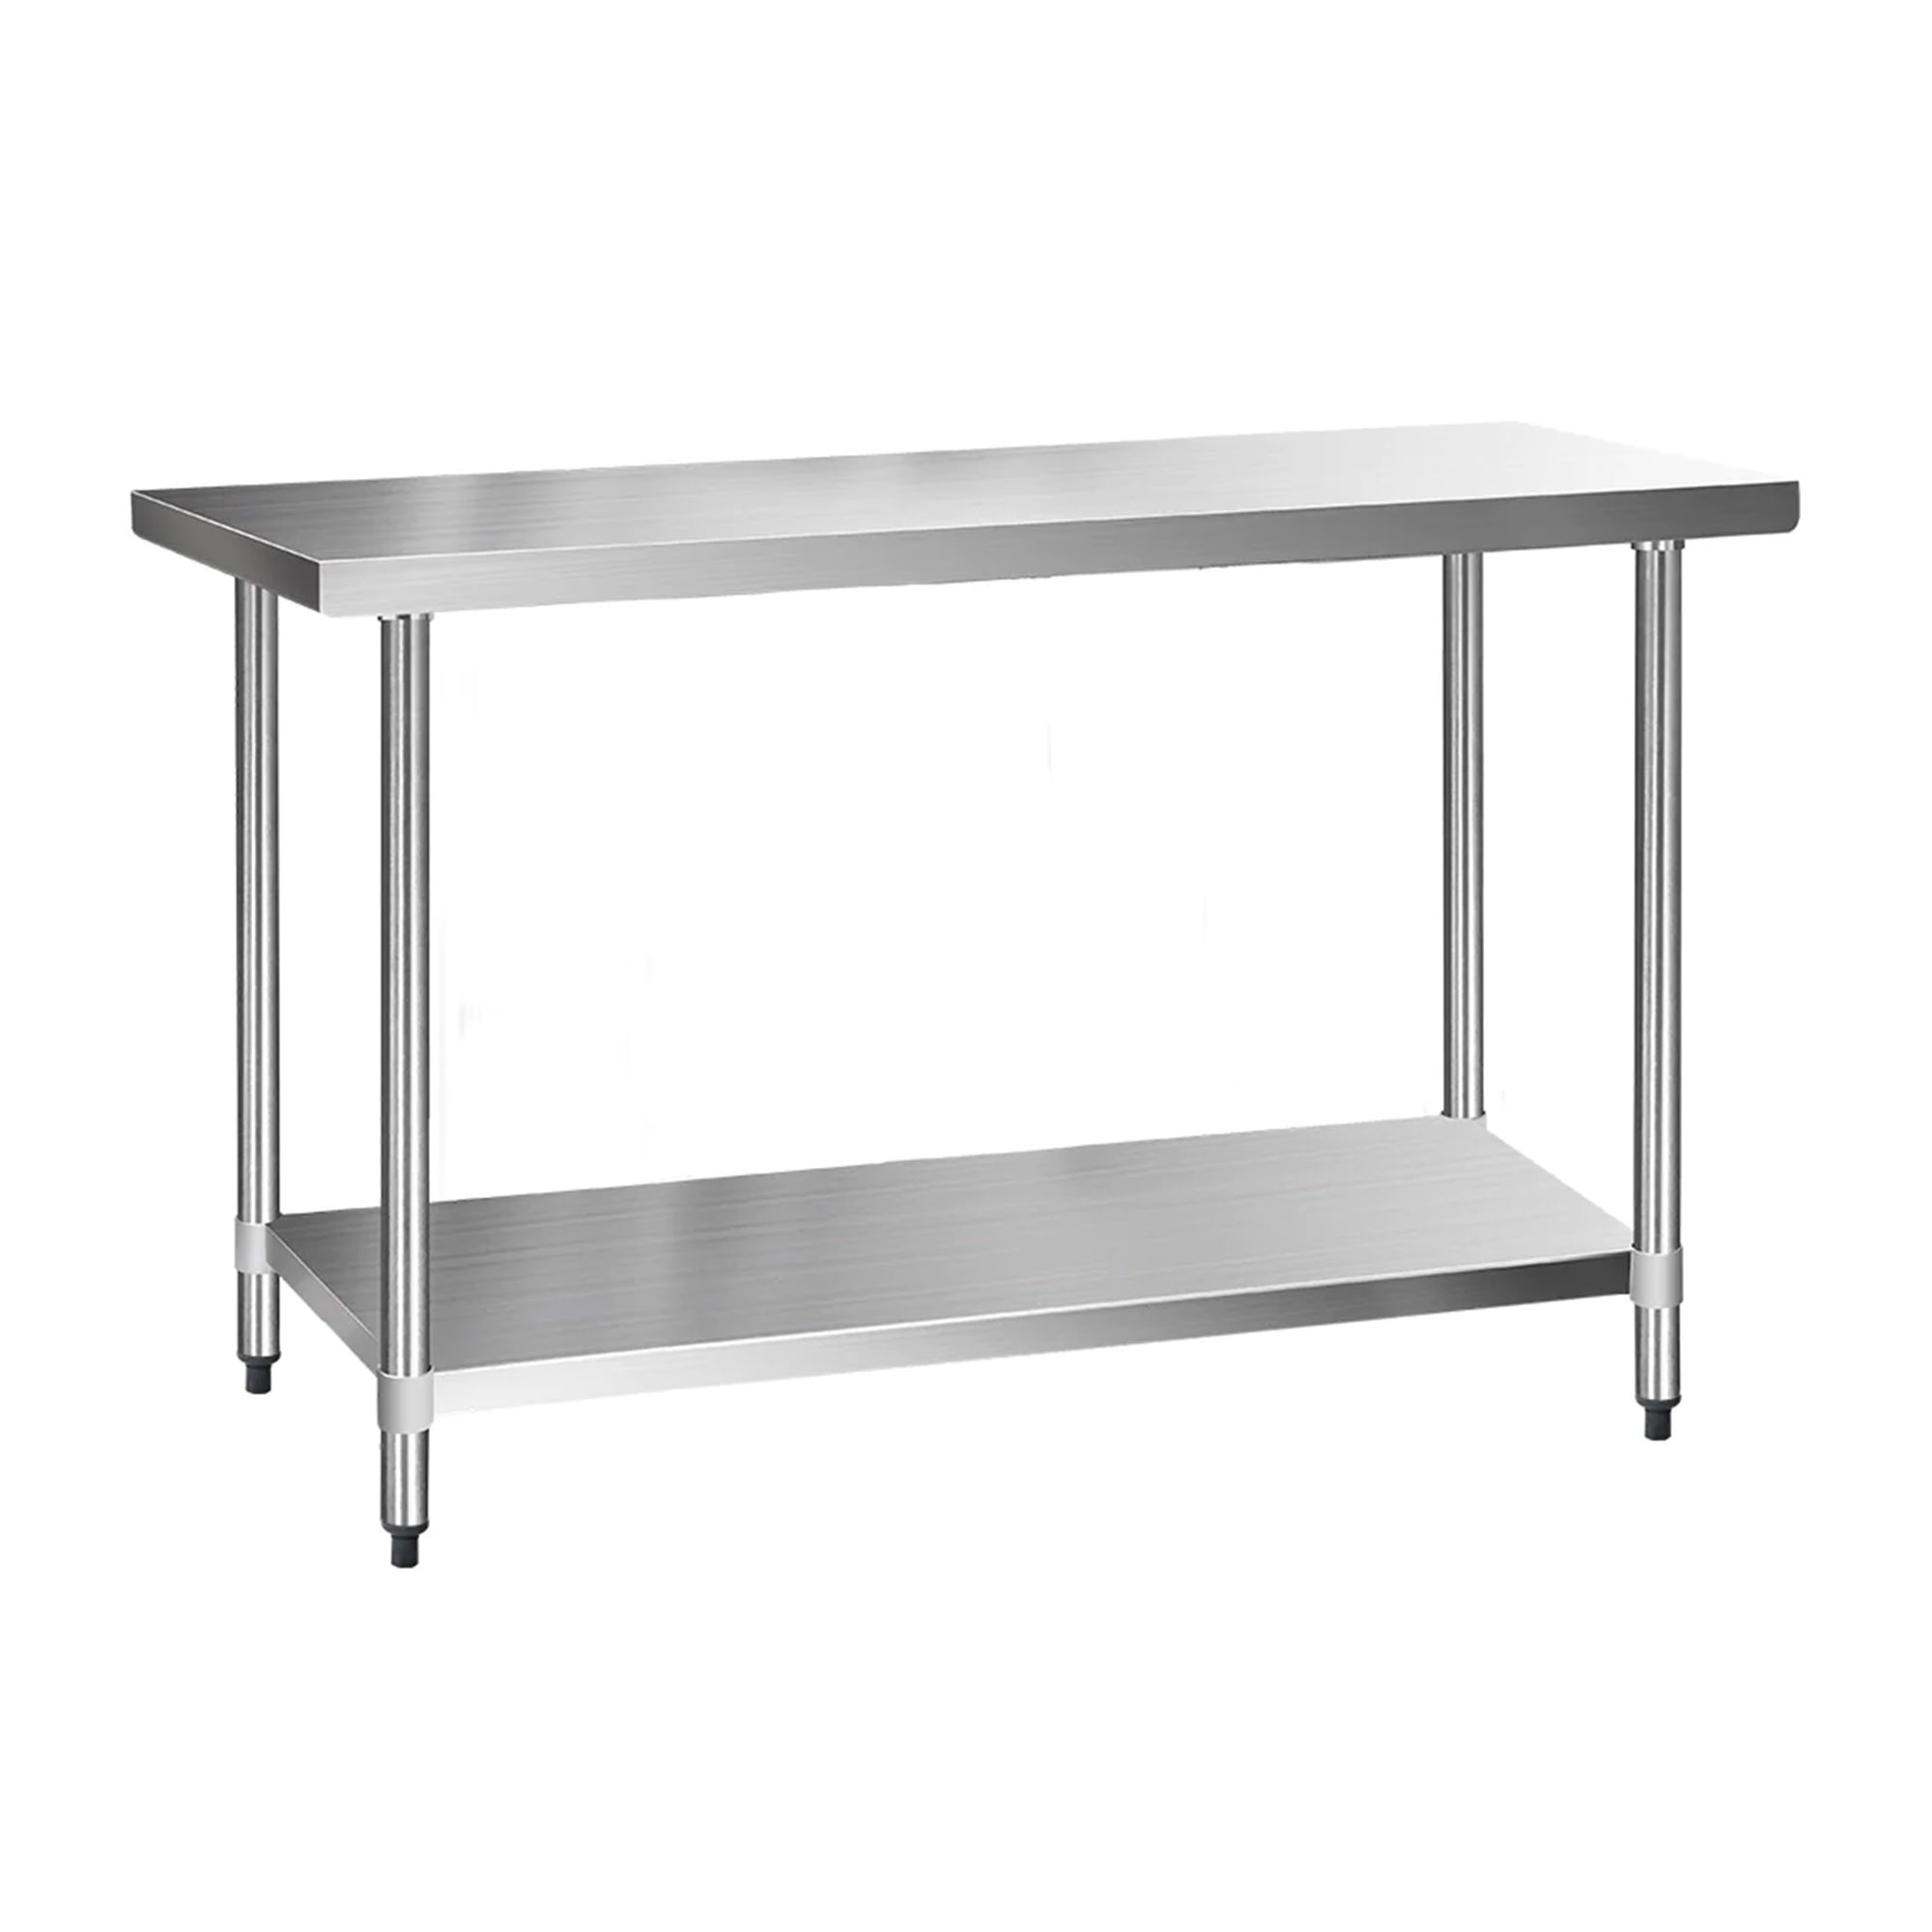 Cefito 304 Stainless Steel Kitchen Bench 152.4x61cm Image 1